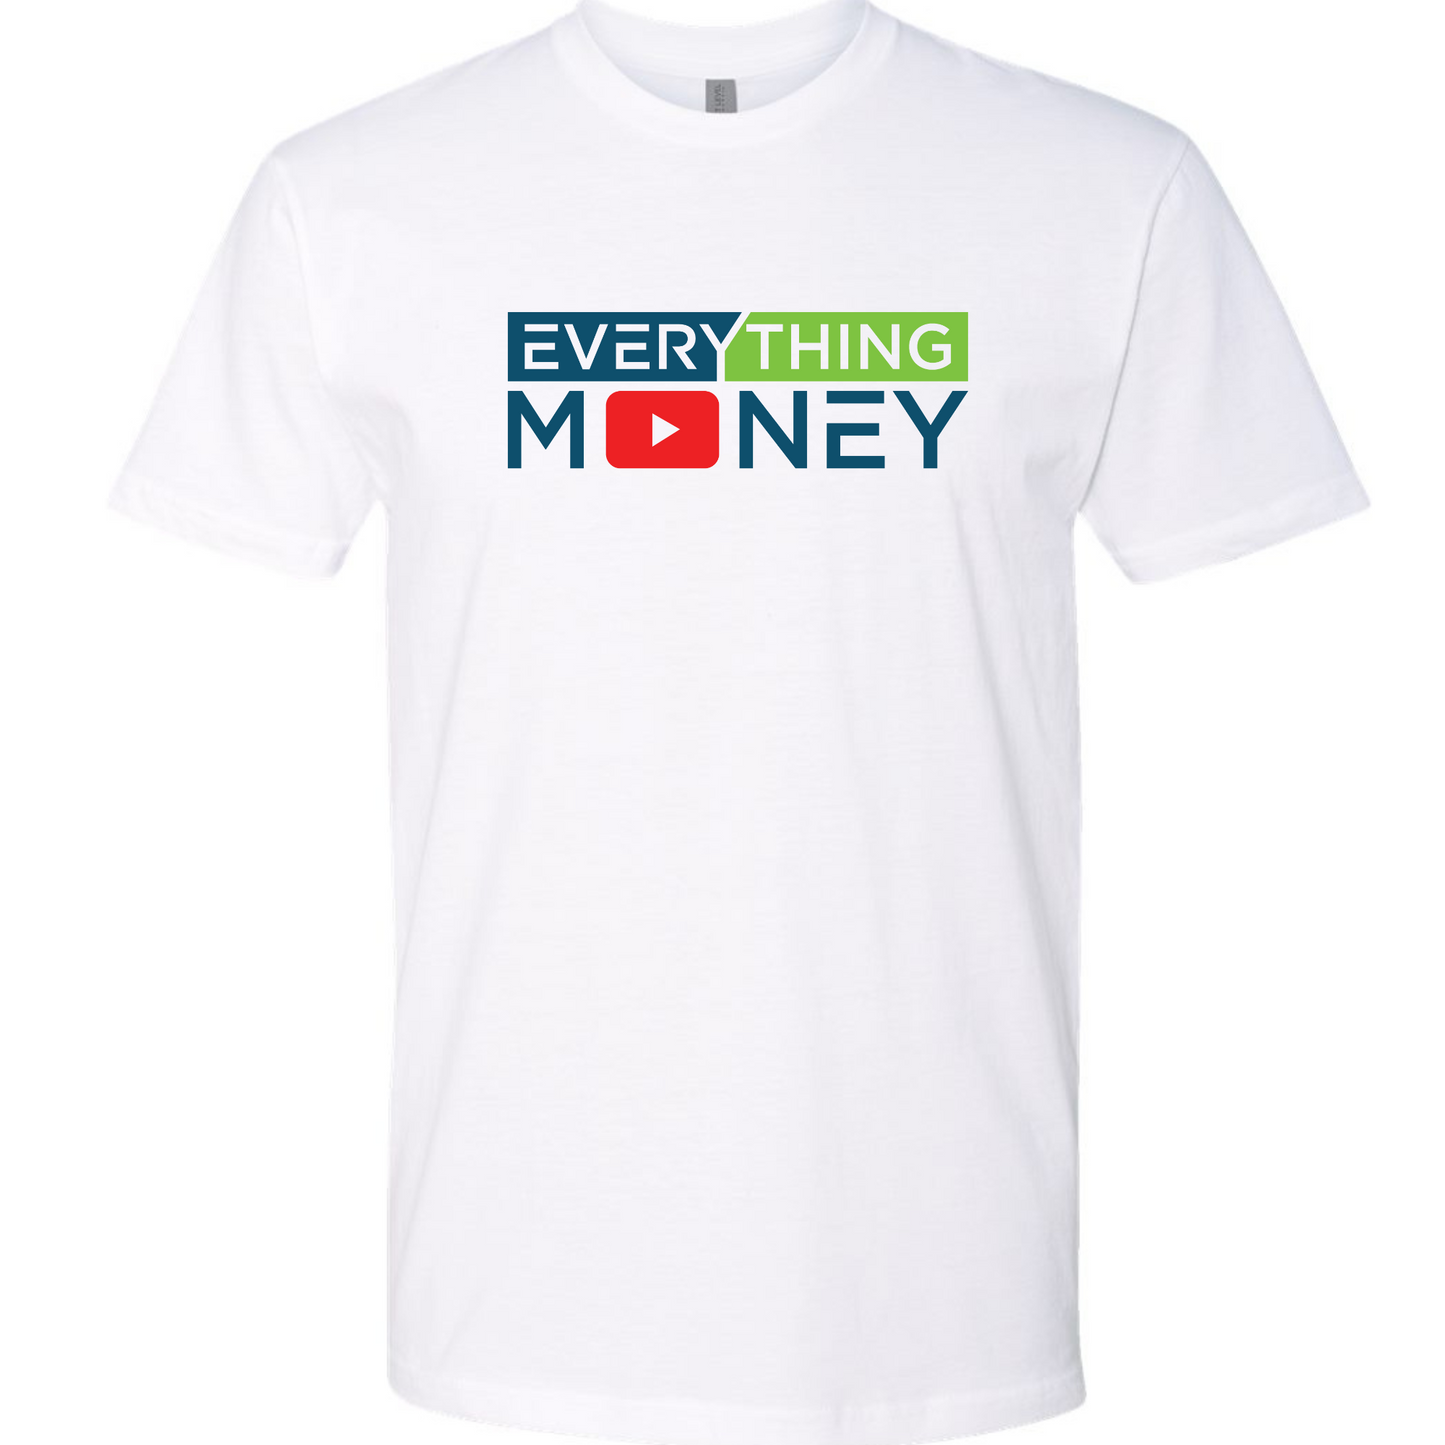 Everything Money Fitted Crew T-Shirt by Next Level